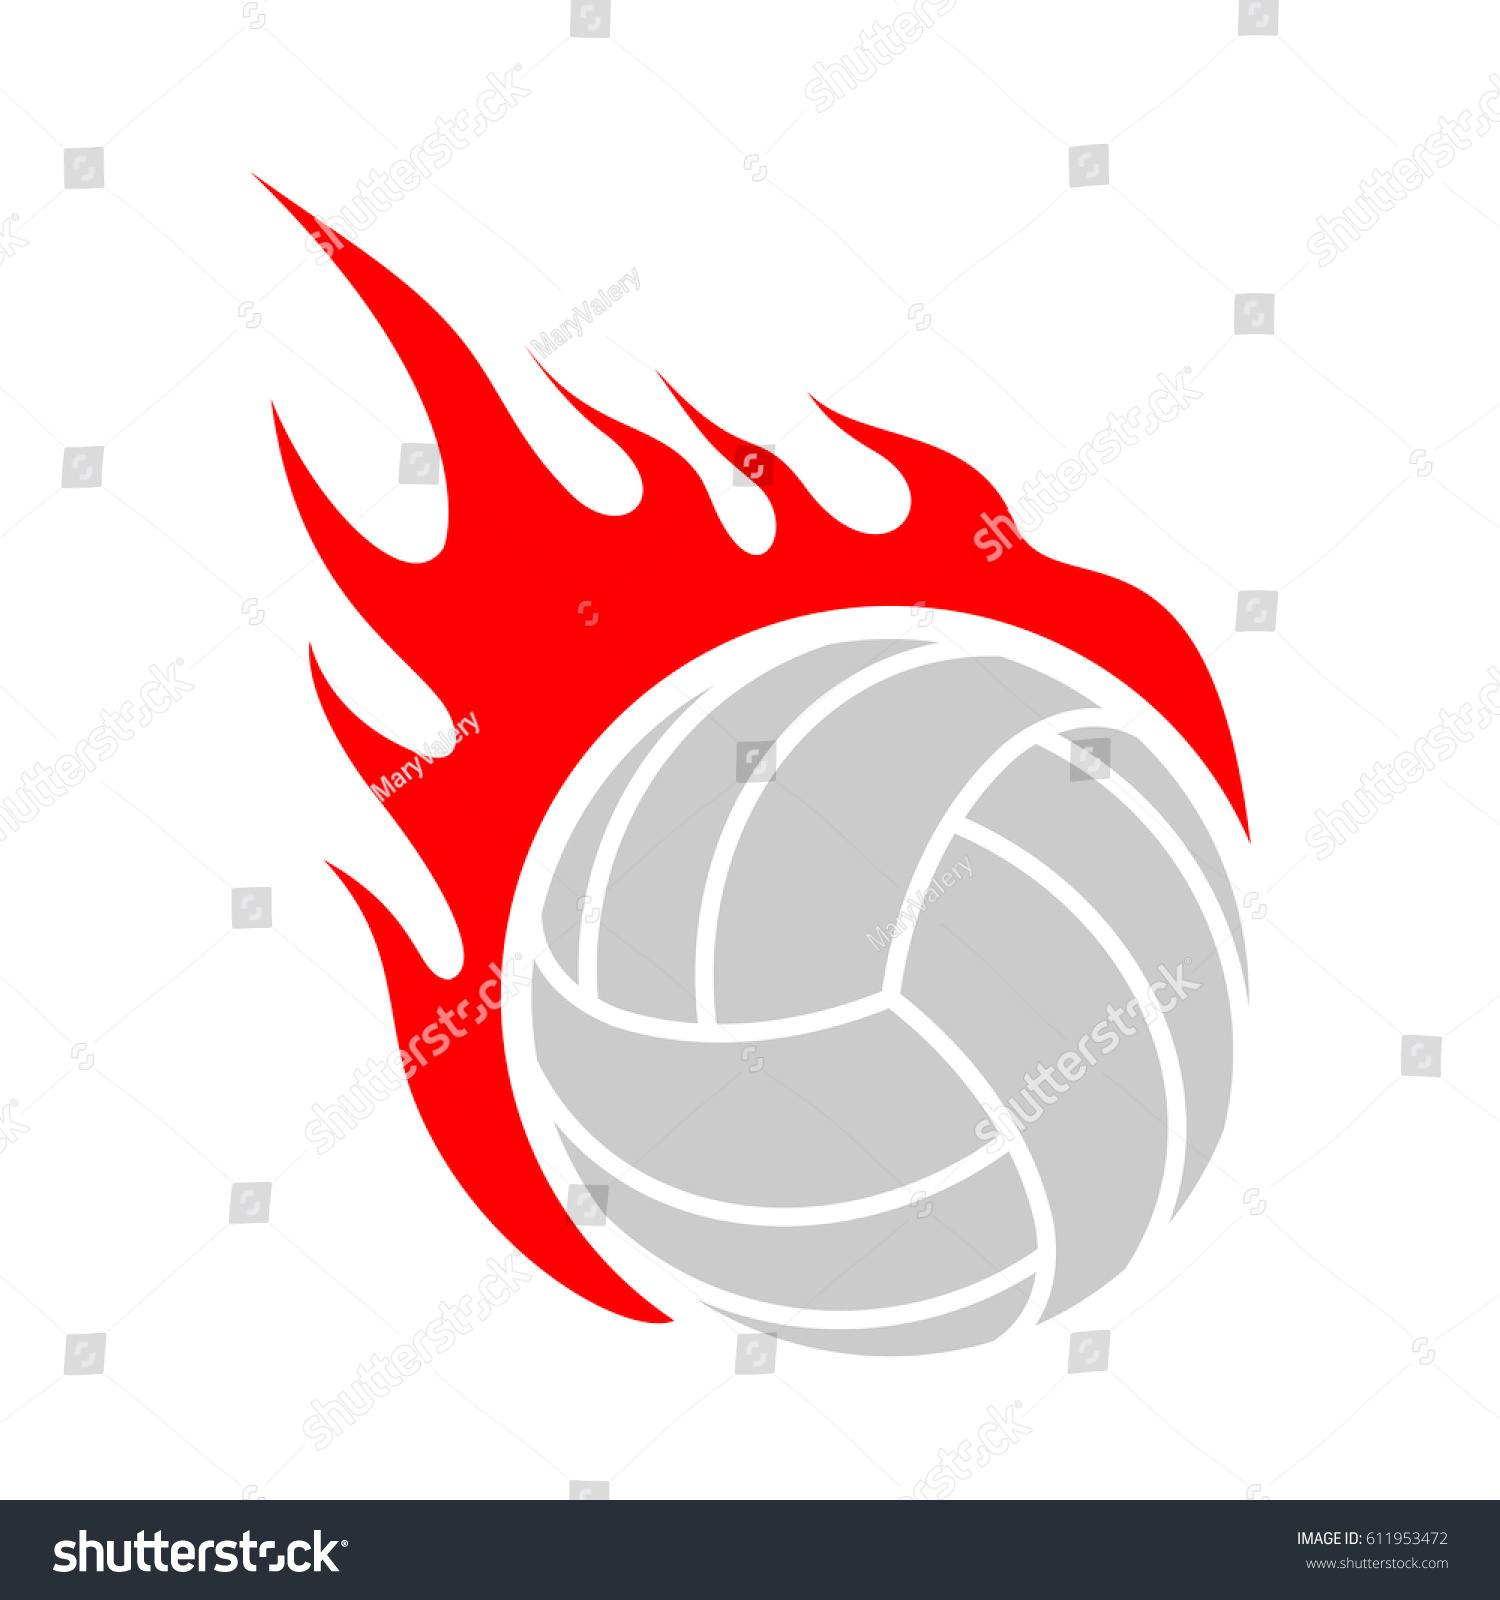 Fire Volleyball Flame Ball Emblem Game Stock Vector 611953472 ...